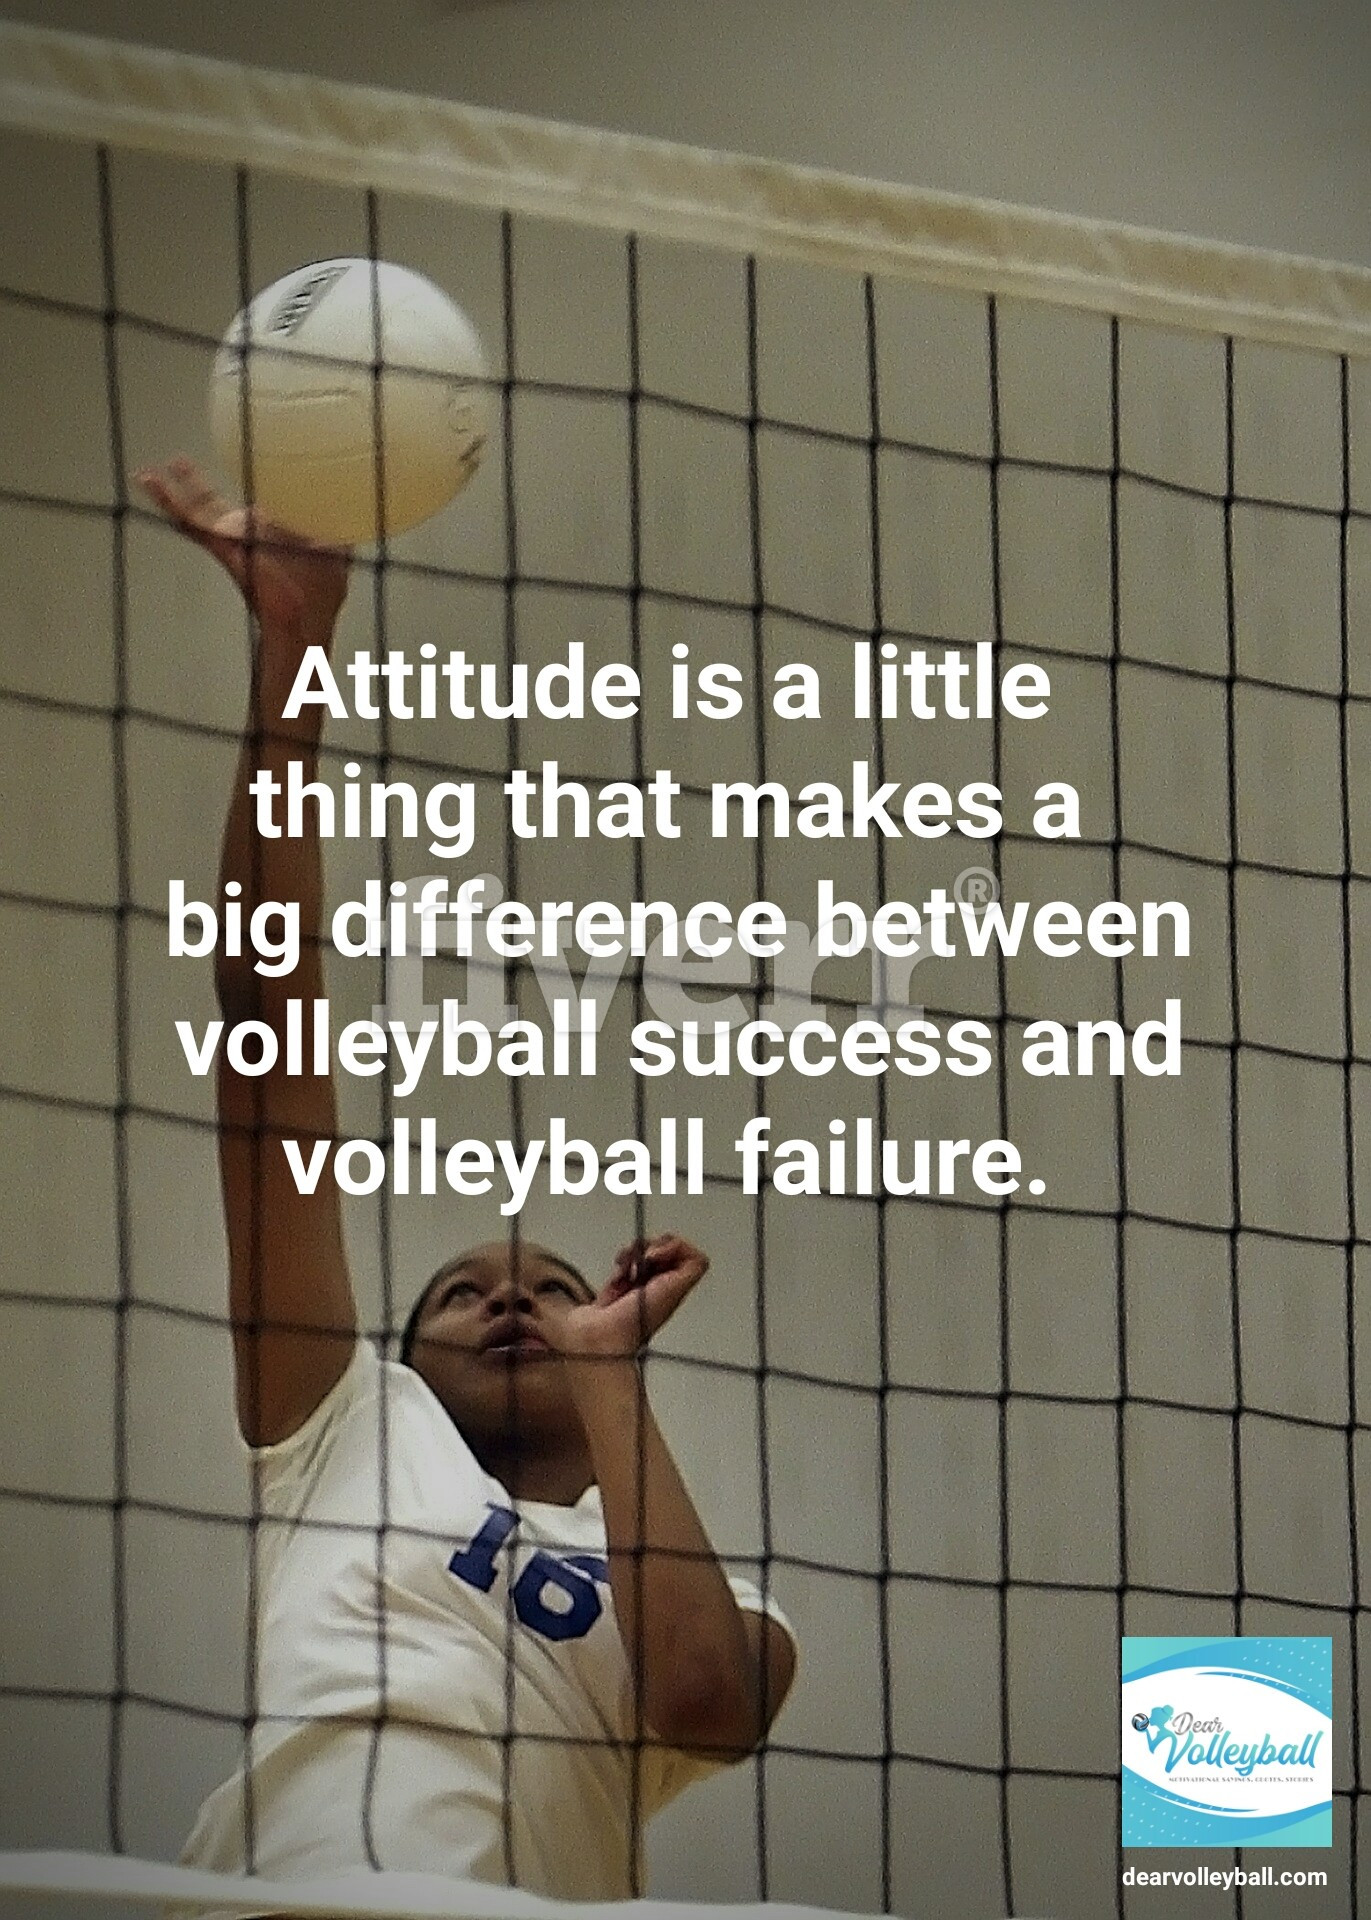 Volleyball Motivational Quotes
 37 Volleyball Motivational Quotes and That Inspire